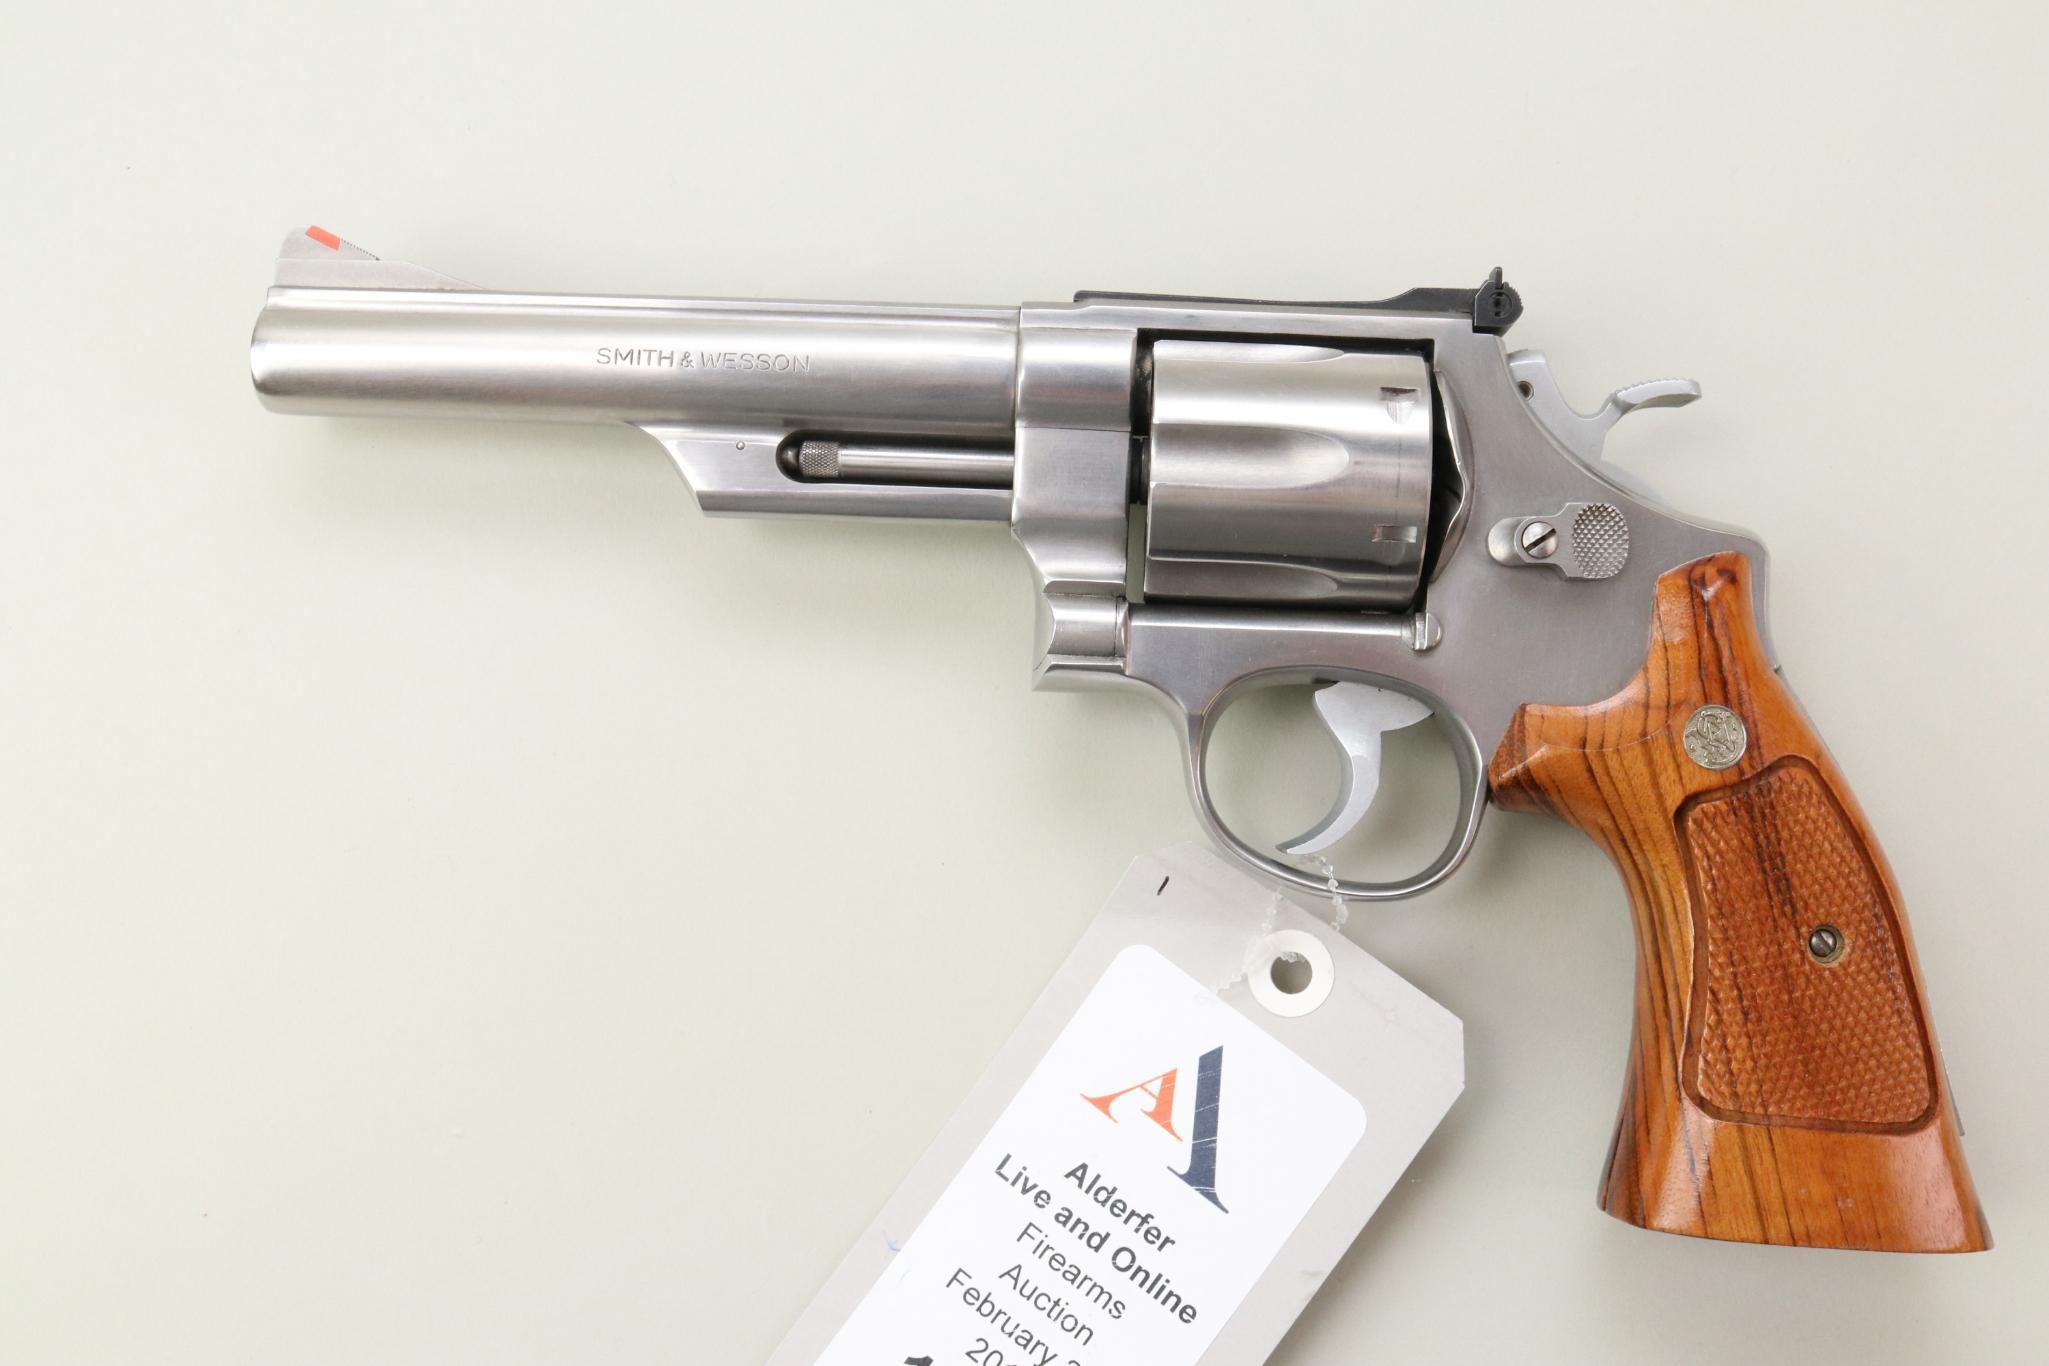 Smith & Wesson 629-1 double action revolver.